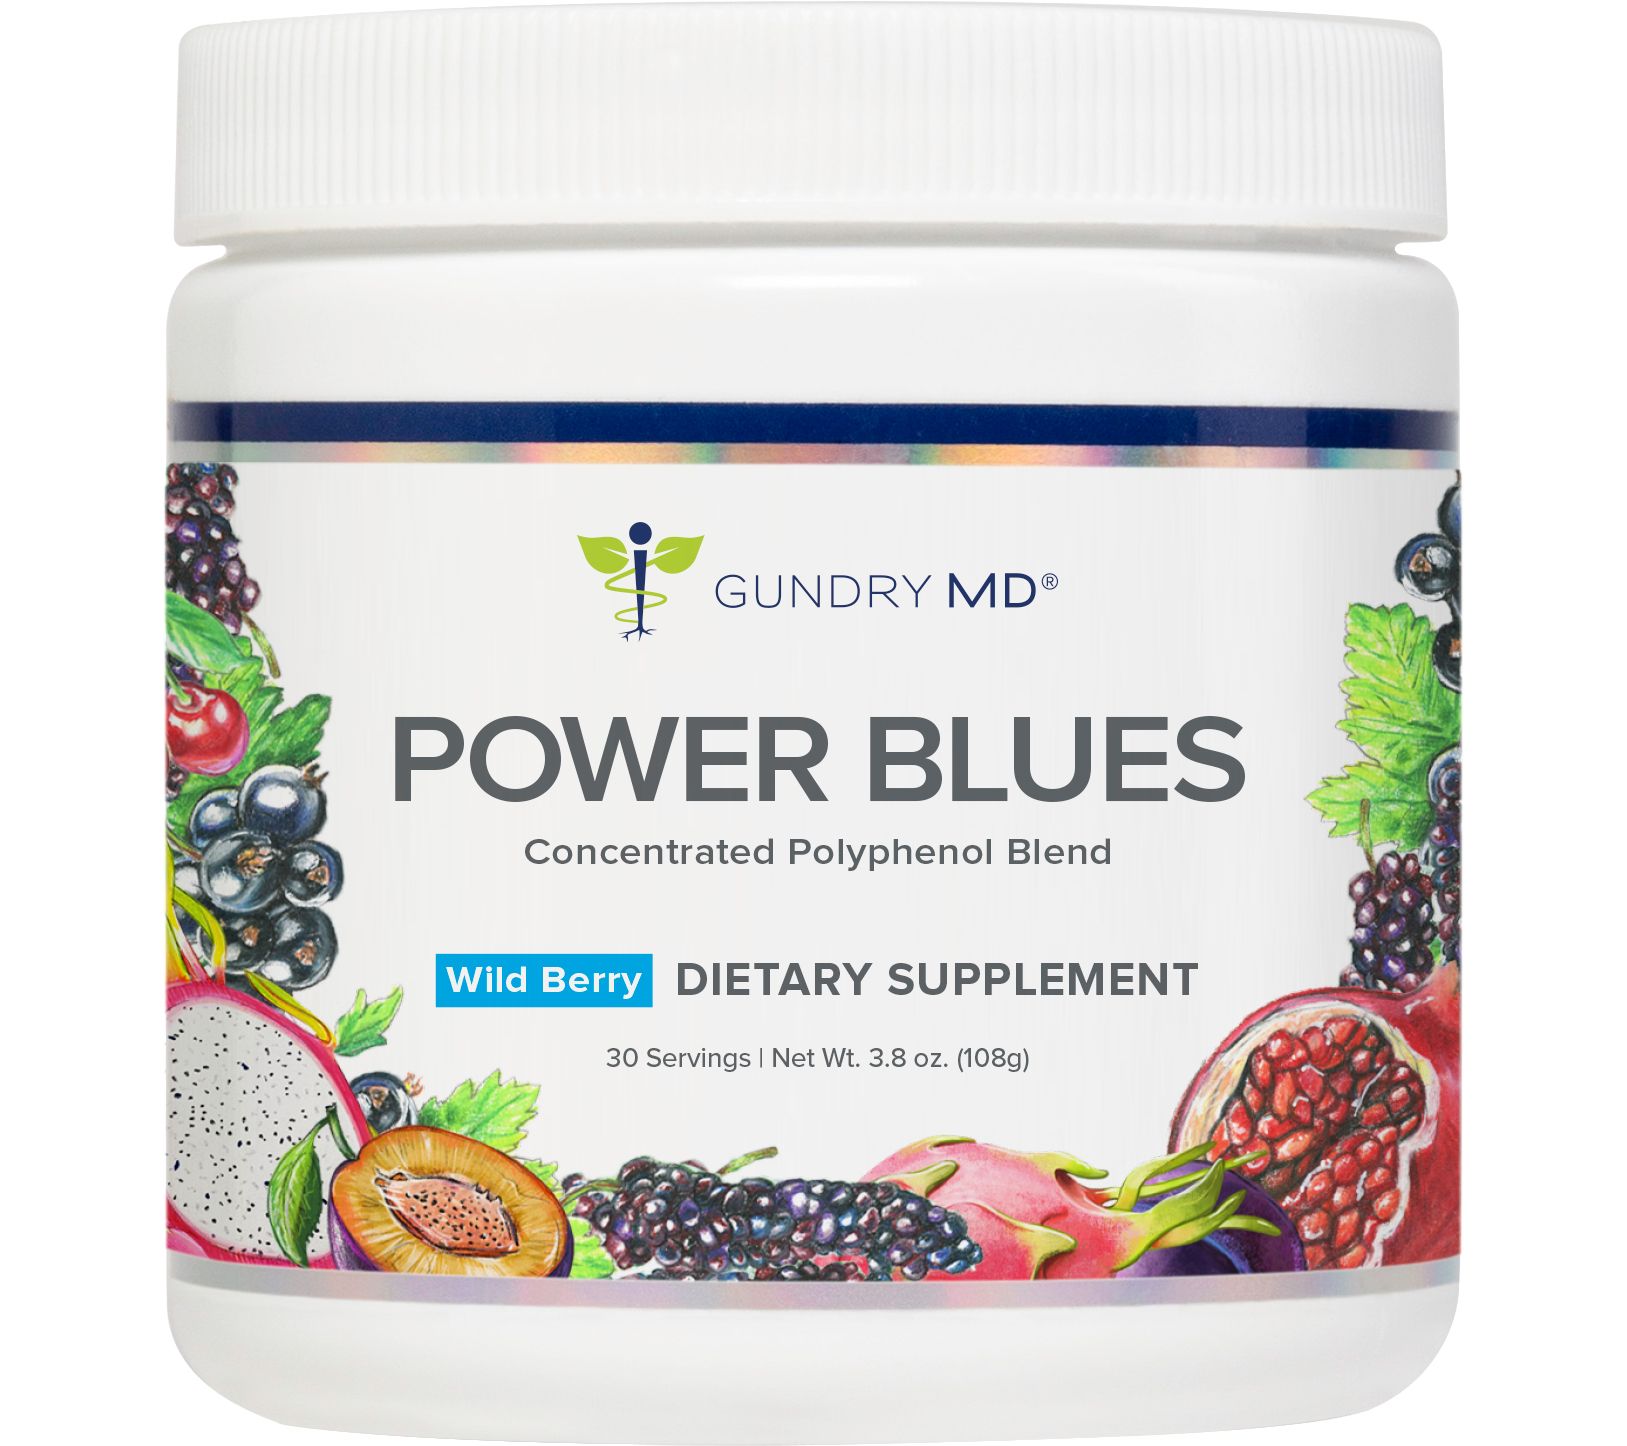 Revival Usikker destillation Gundry MD Power Blues Powdered Drink Mix 30 Day Supply - QVC.com